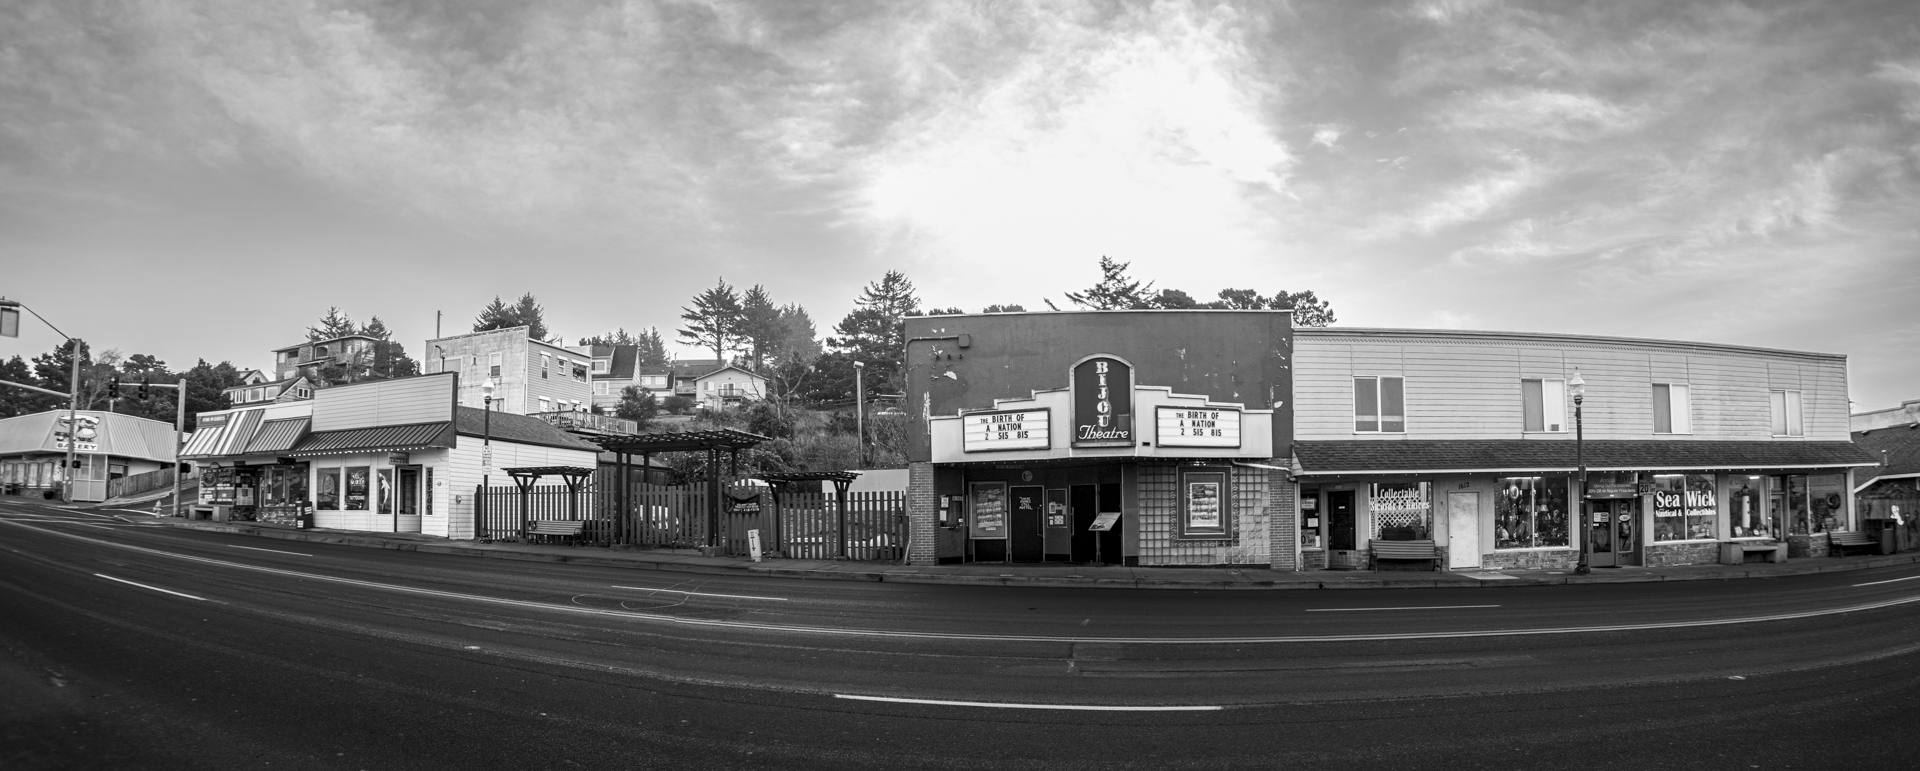 Panoramic of small downtown with theatre